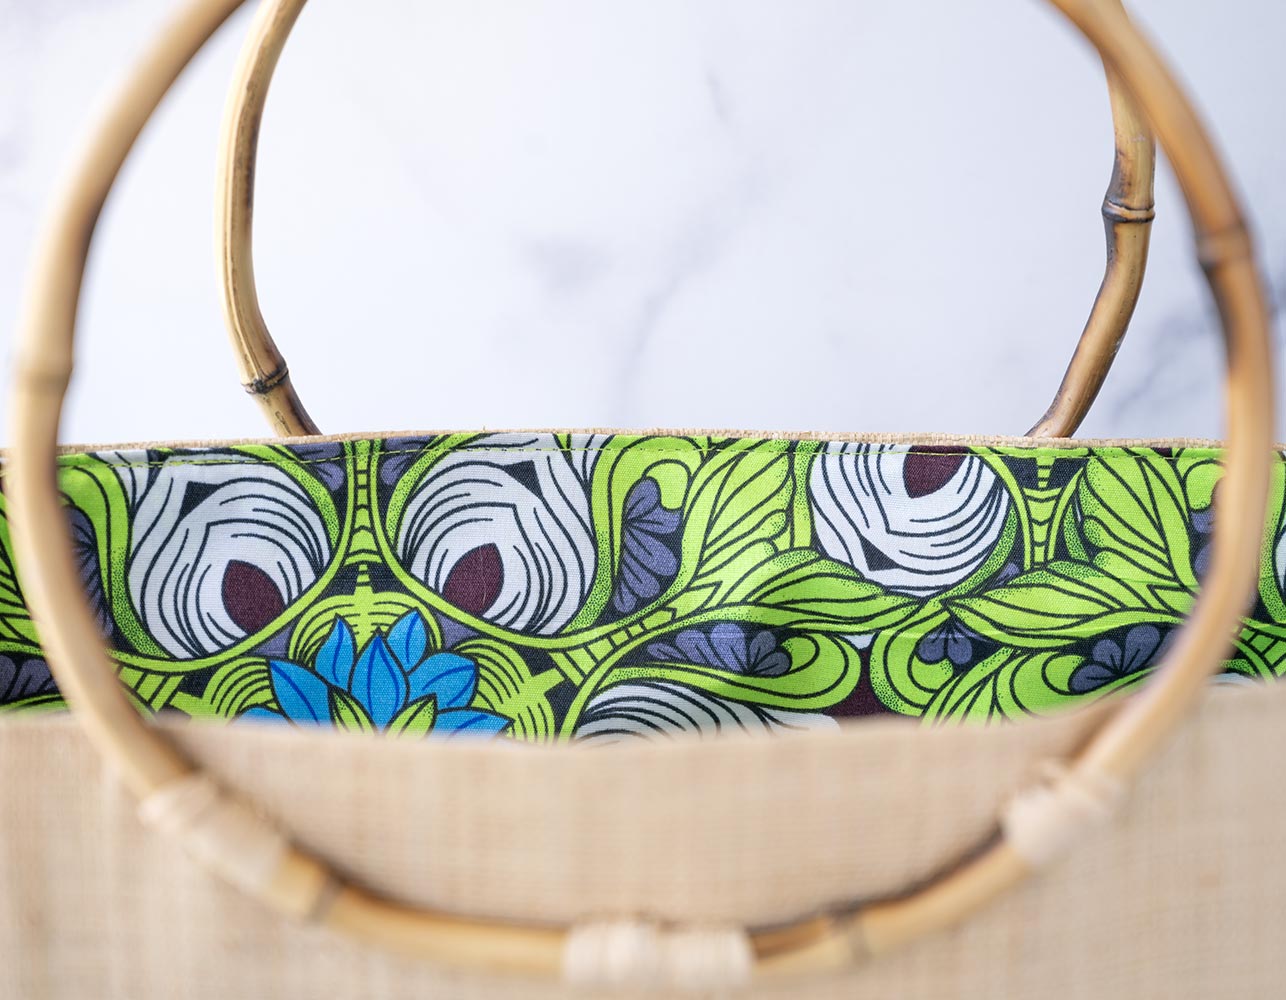 Top Open Interior View of the Shebobo Bebe Straw Bag with Bamboo Handles